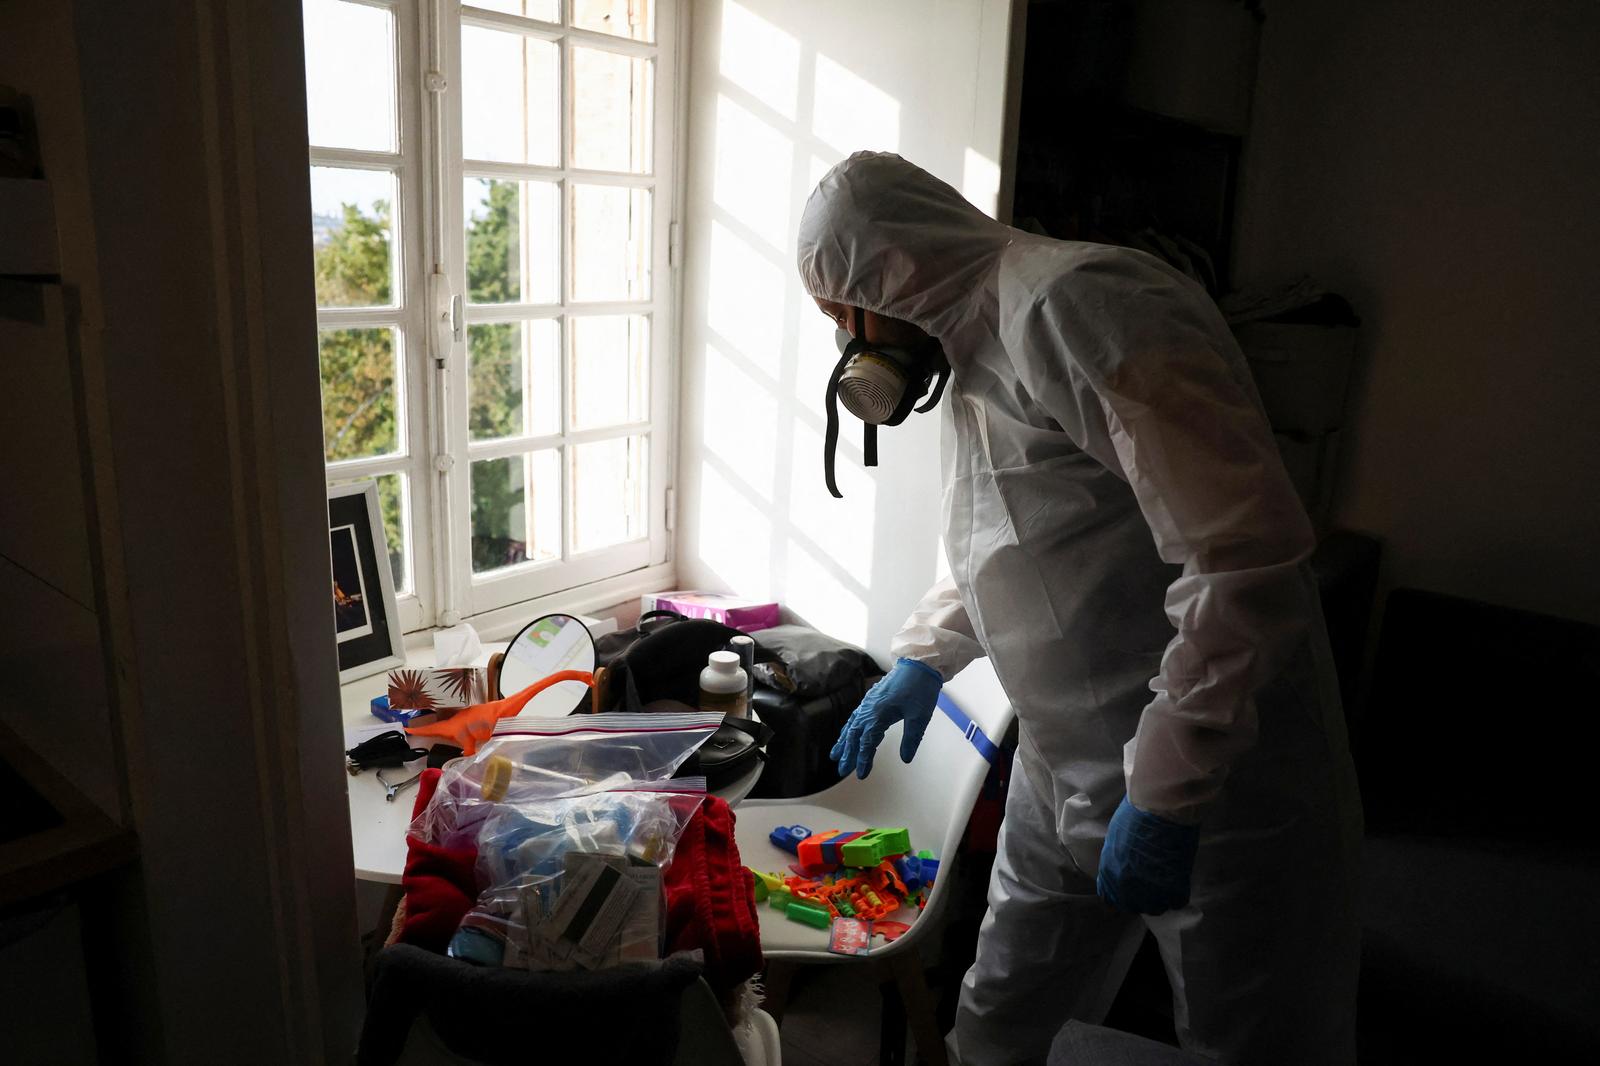 Salim Dahou, biocide technician from the company Hygiene Premium, inspects an apartment in order to treat it against bedbugs in L'Hay-les-Roses, near Paris, France, September 29, 2023. REUTERS/Stephanie Lecocq Photo: STEPHANIE LECOCQ/REUTERS